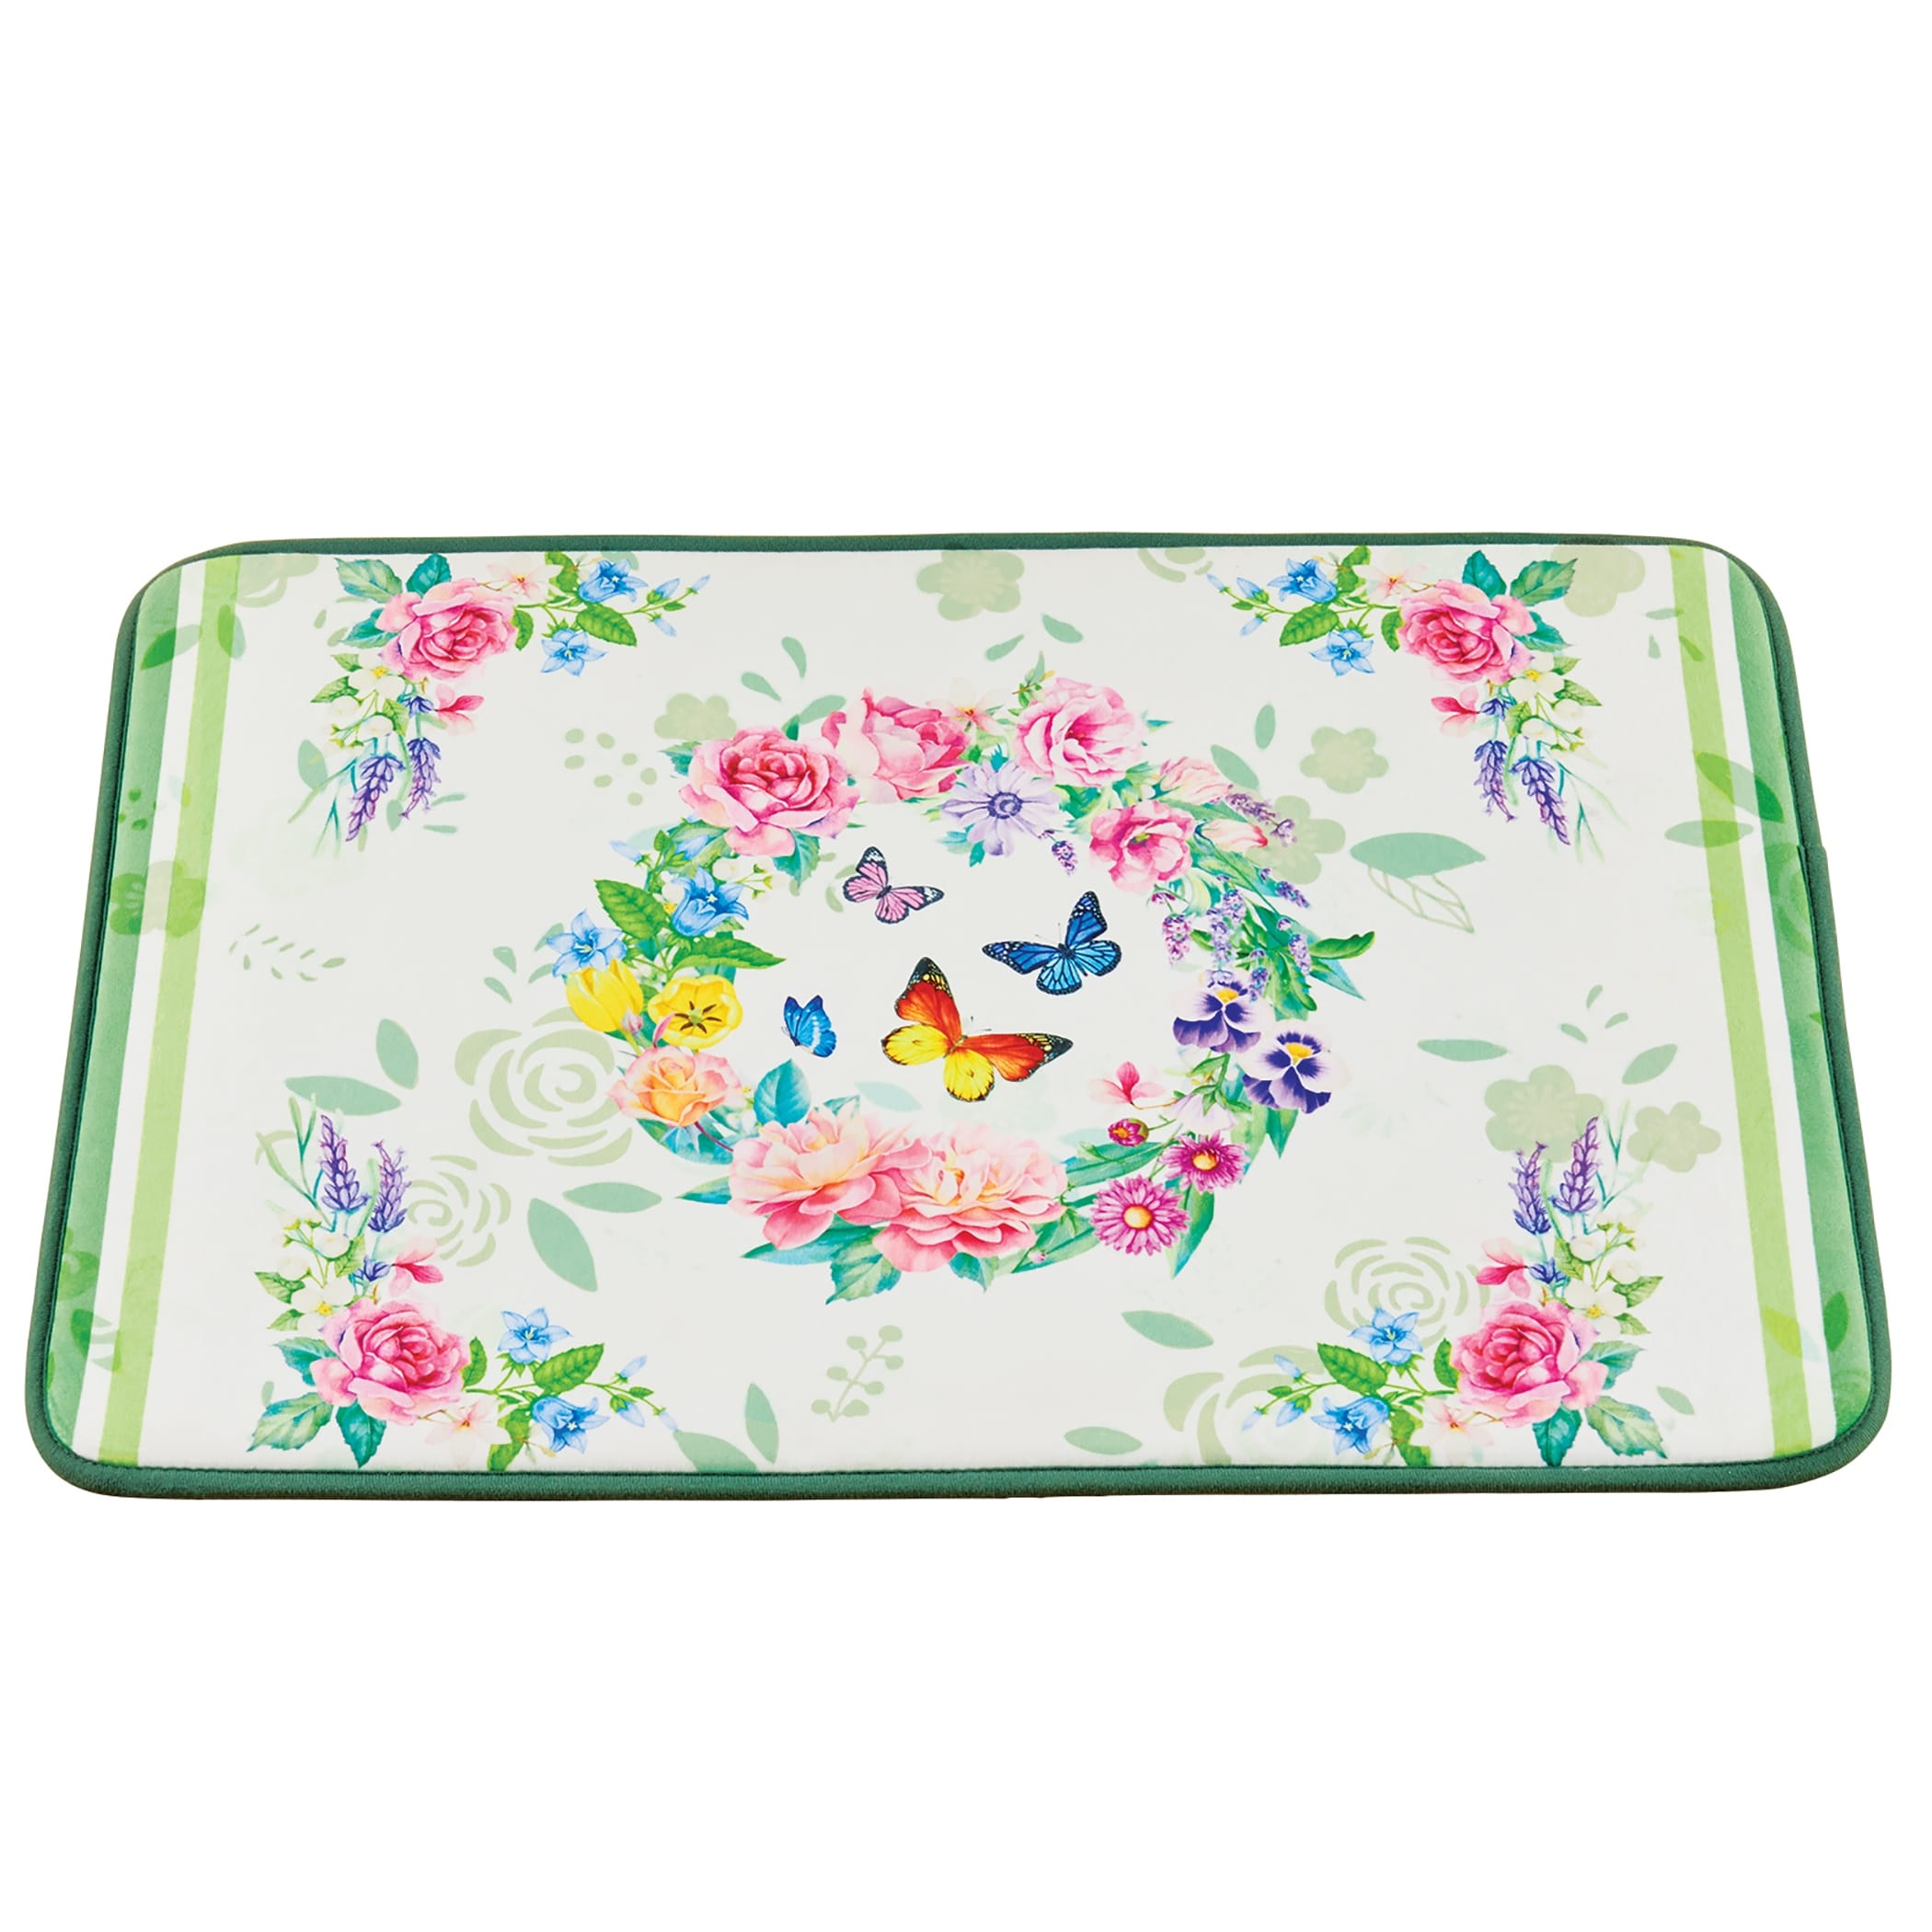 Colorful Butterfly Floral Wreath Bath Mat - Bed Bath  Beyond - 37365503